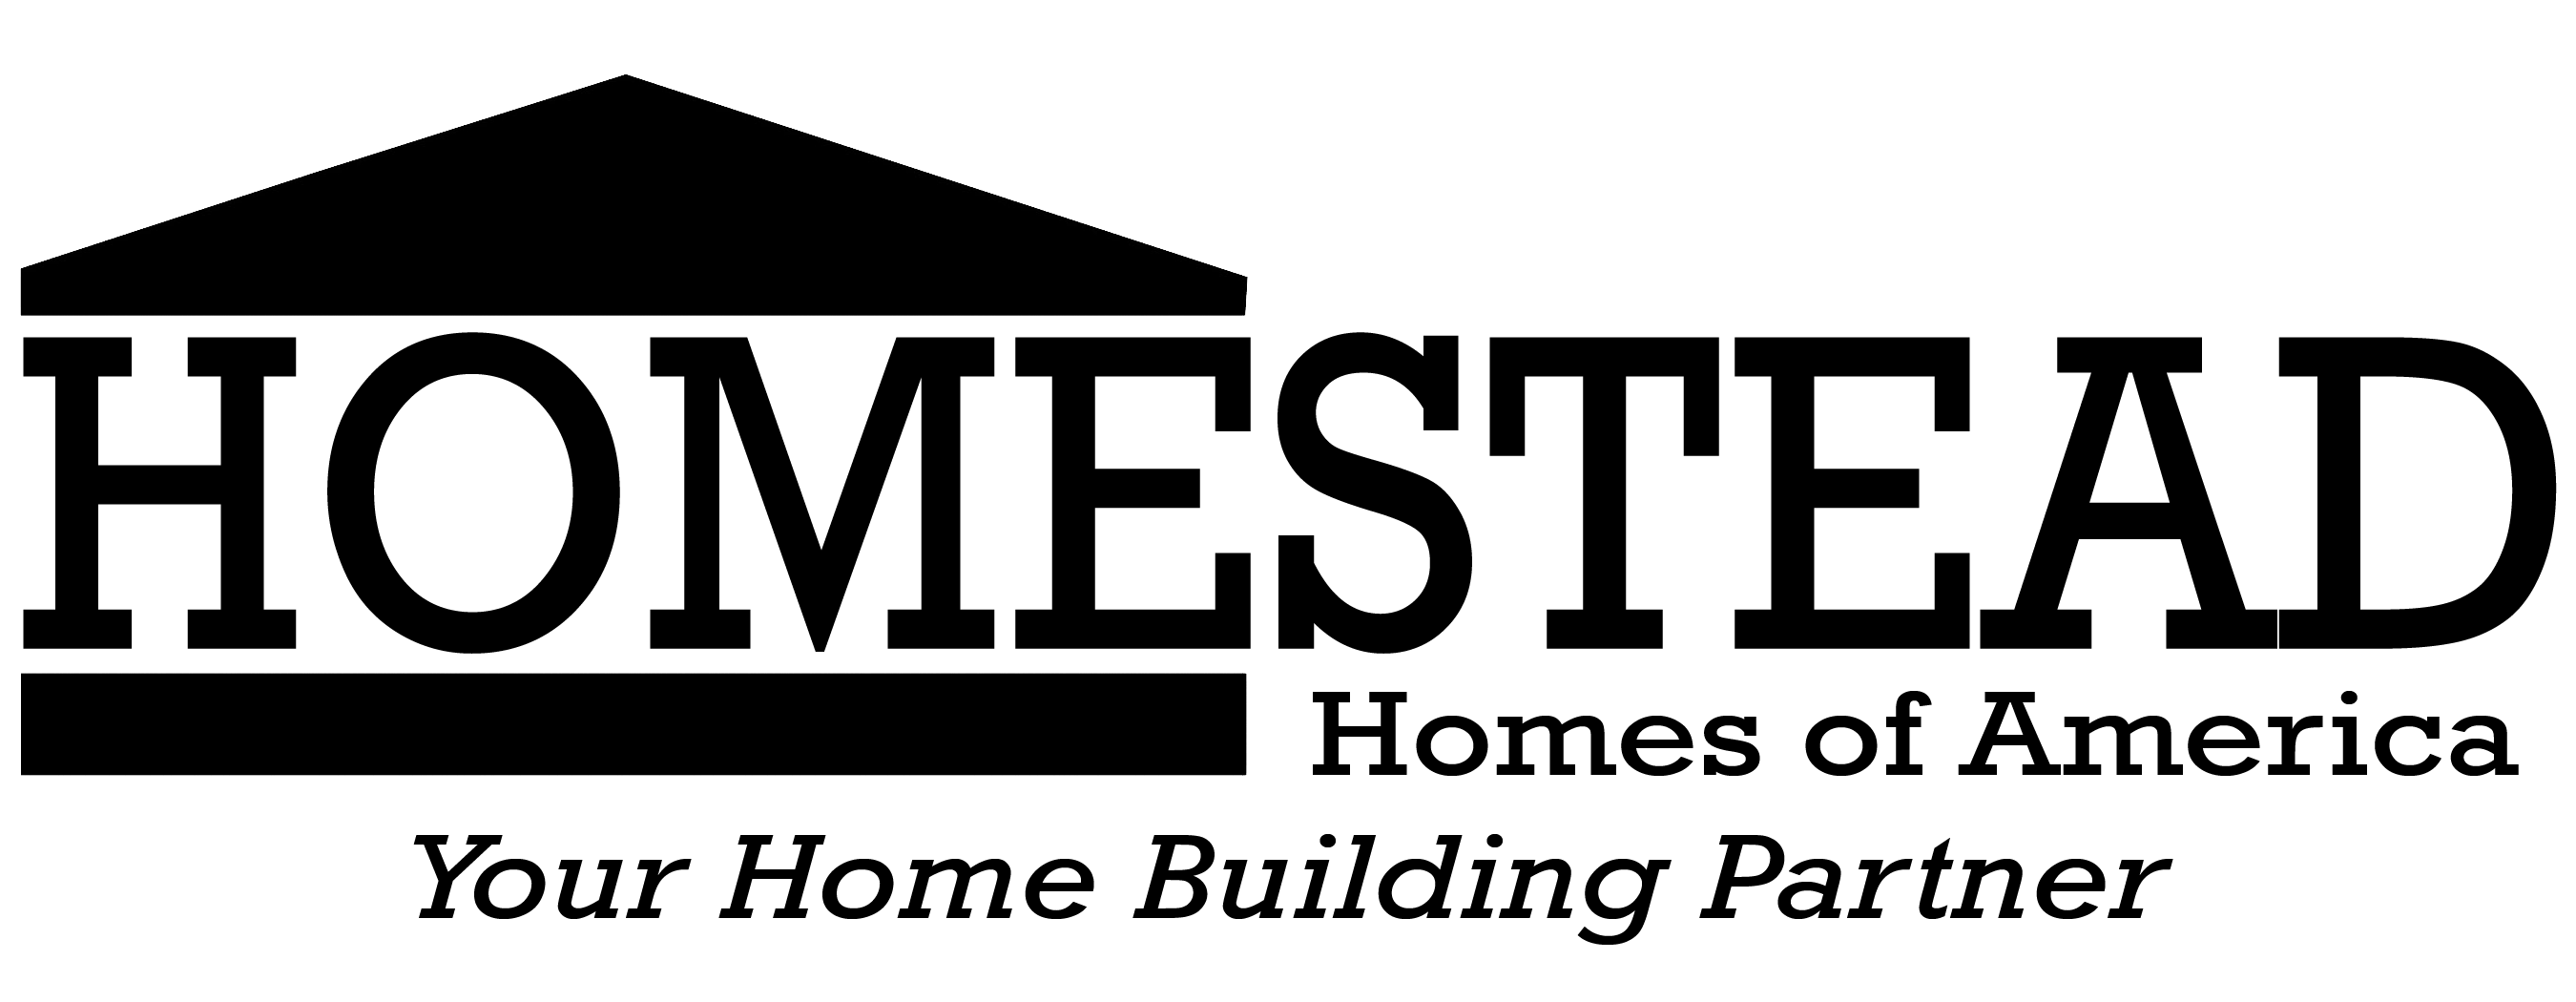 Homesteader Logo - Build Your Own Home Yourself. Best Homestead House Plans